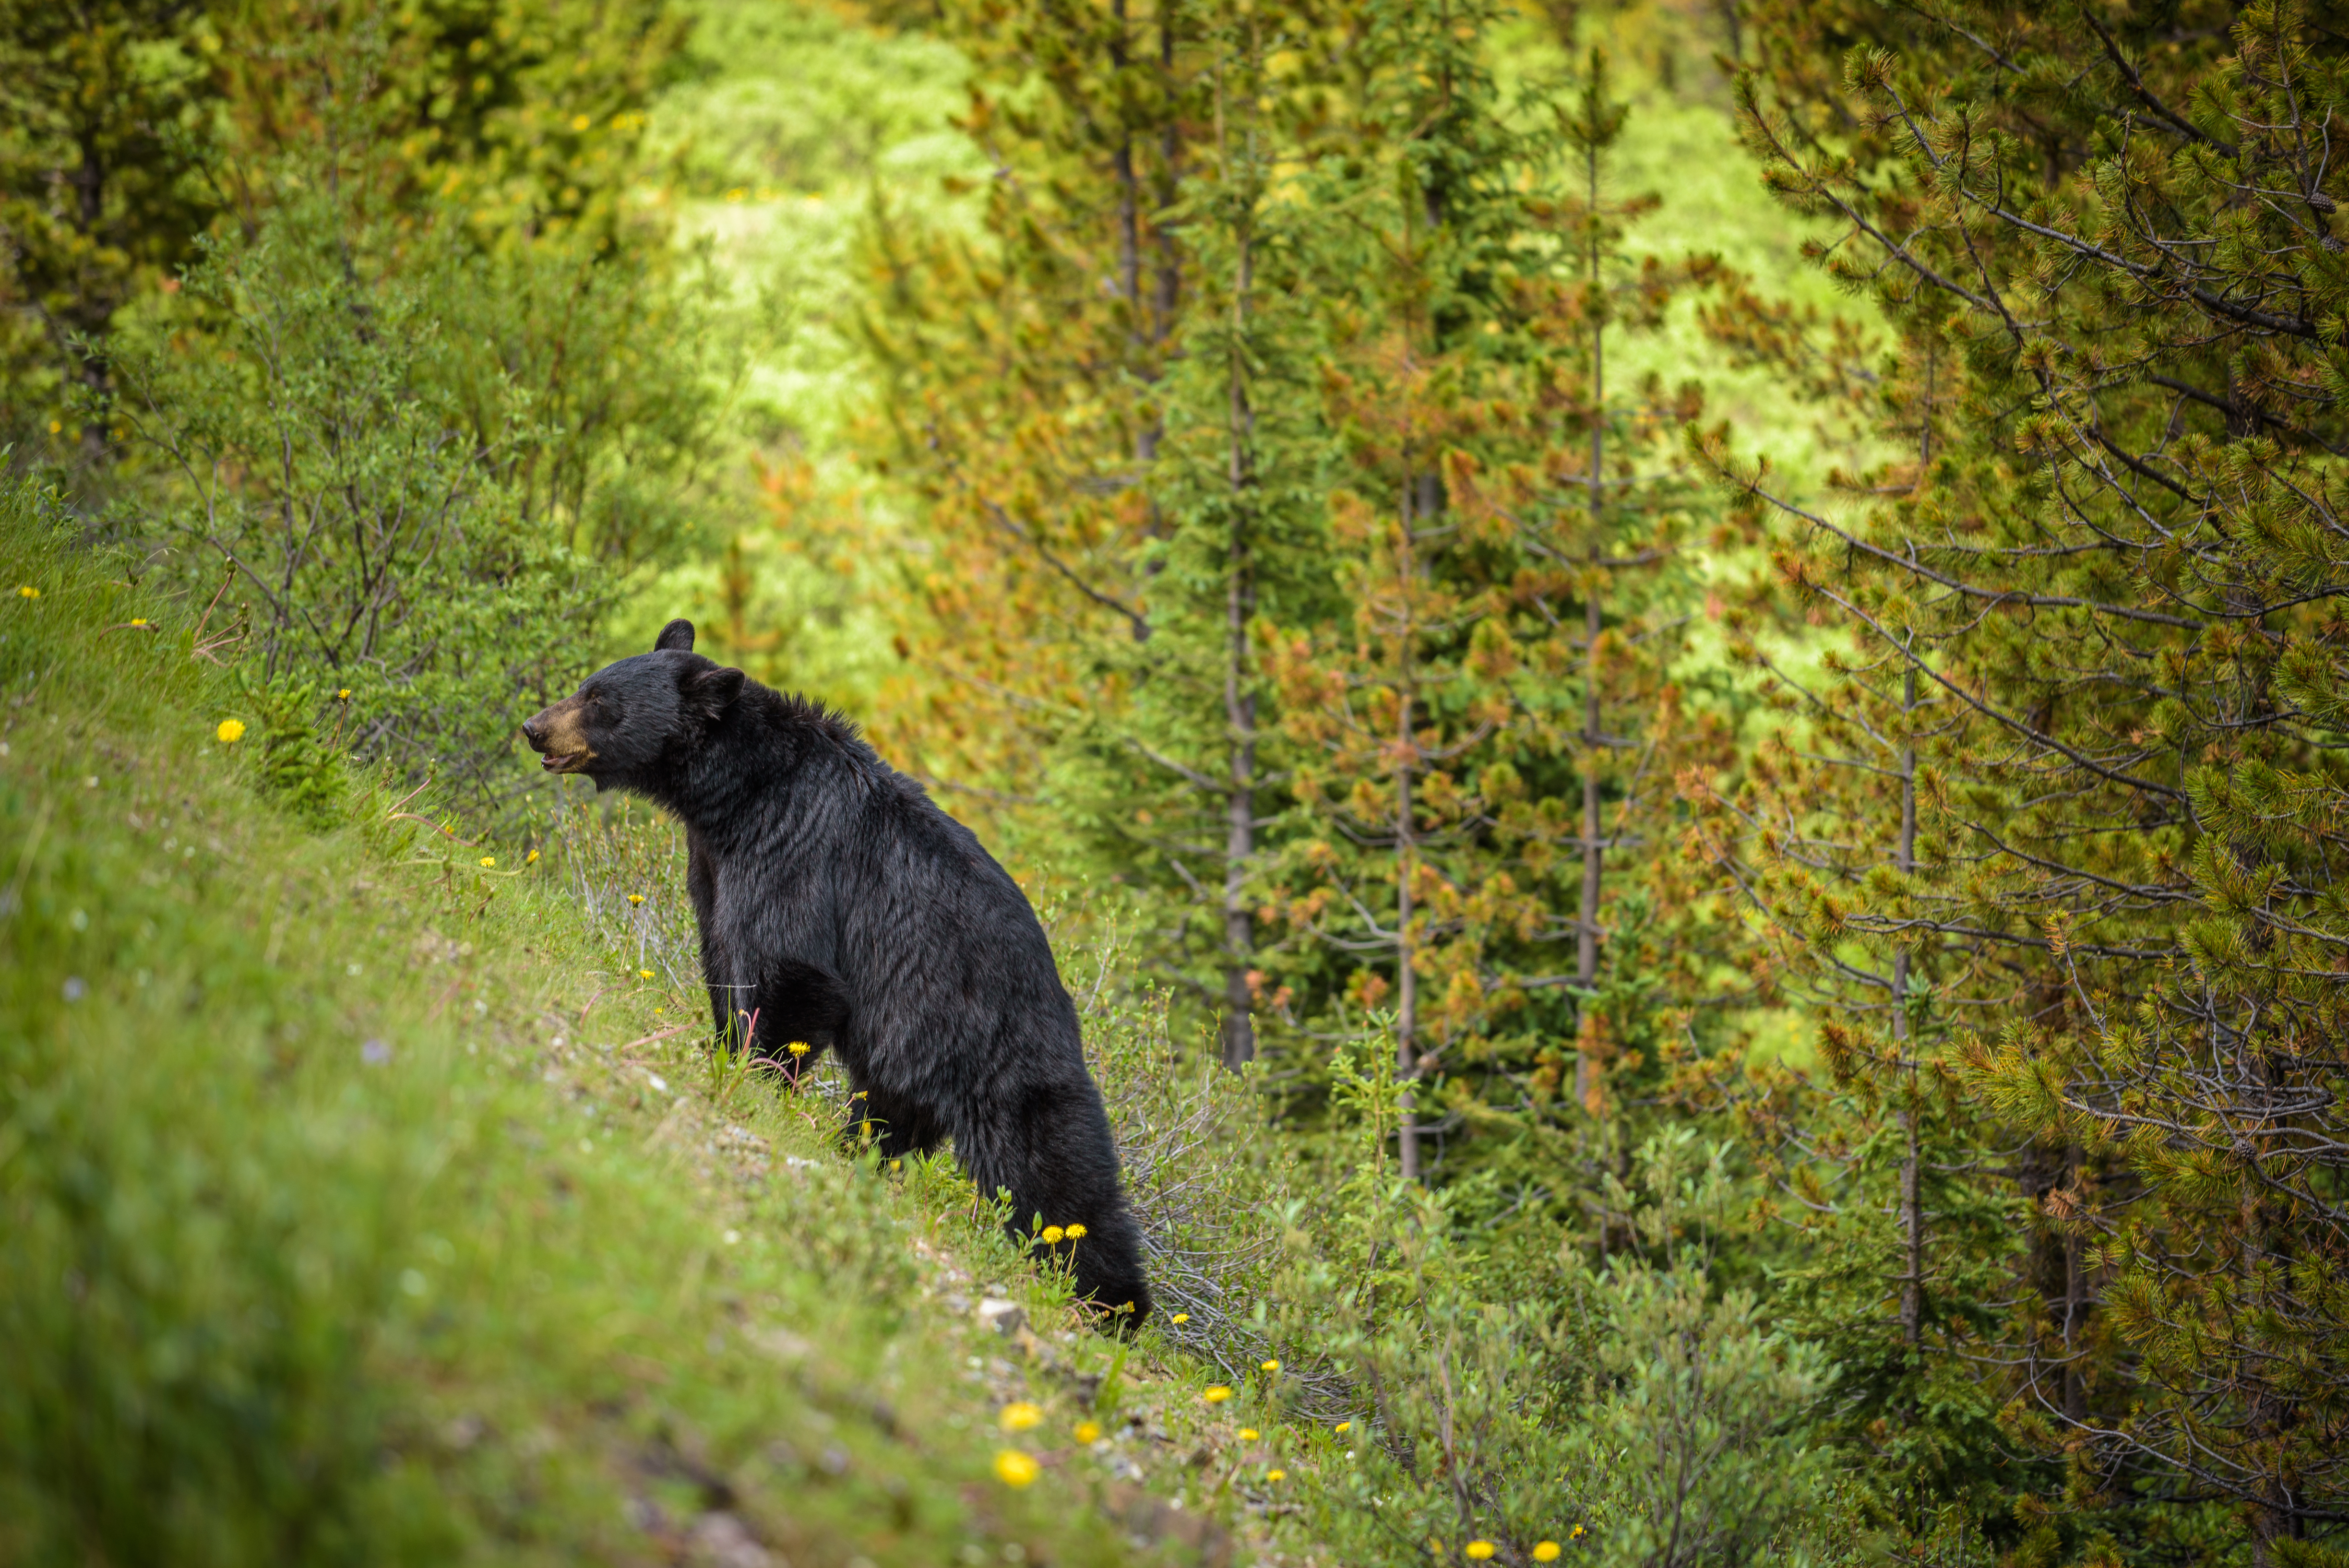 A bear on the side of a hill, Theresa Vail accidental bear kill concept. 